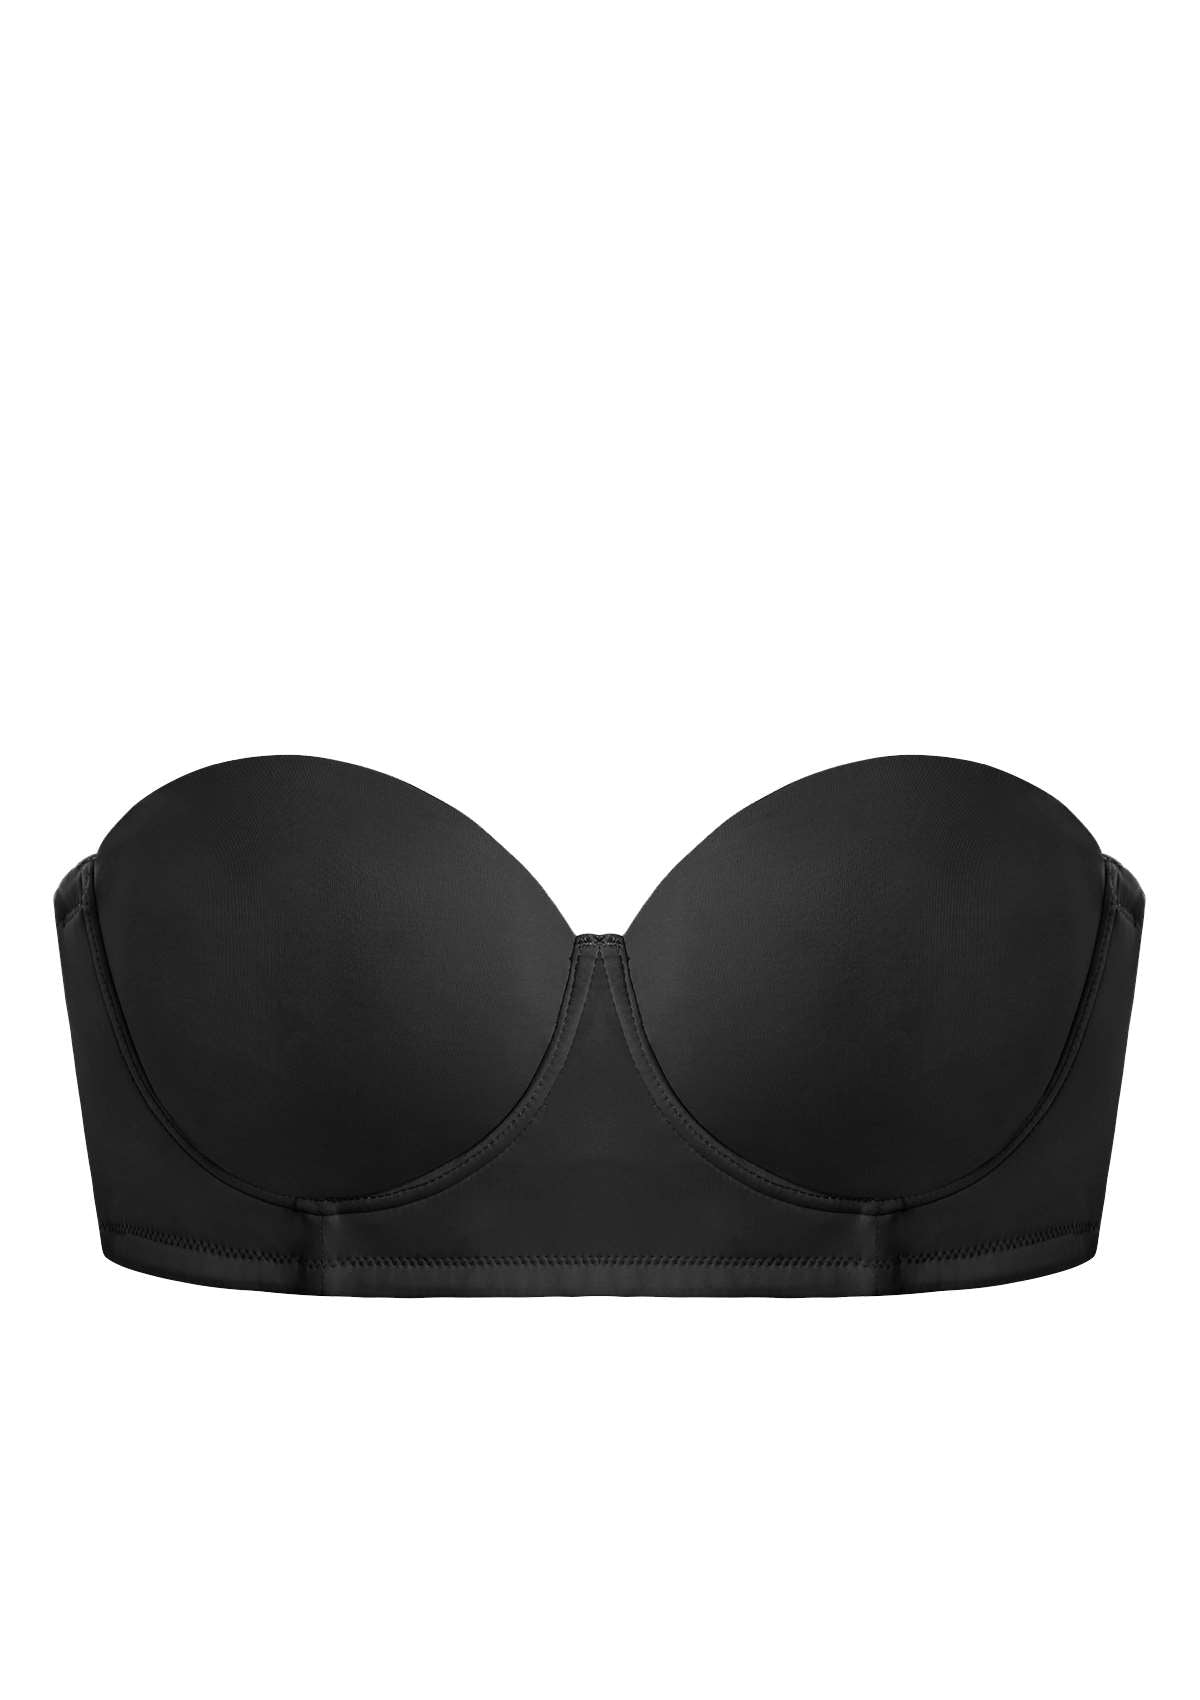 HSIA Margaret Molded Convertible Multiway Classic Strapless Bra - Black / 40 / G